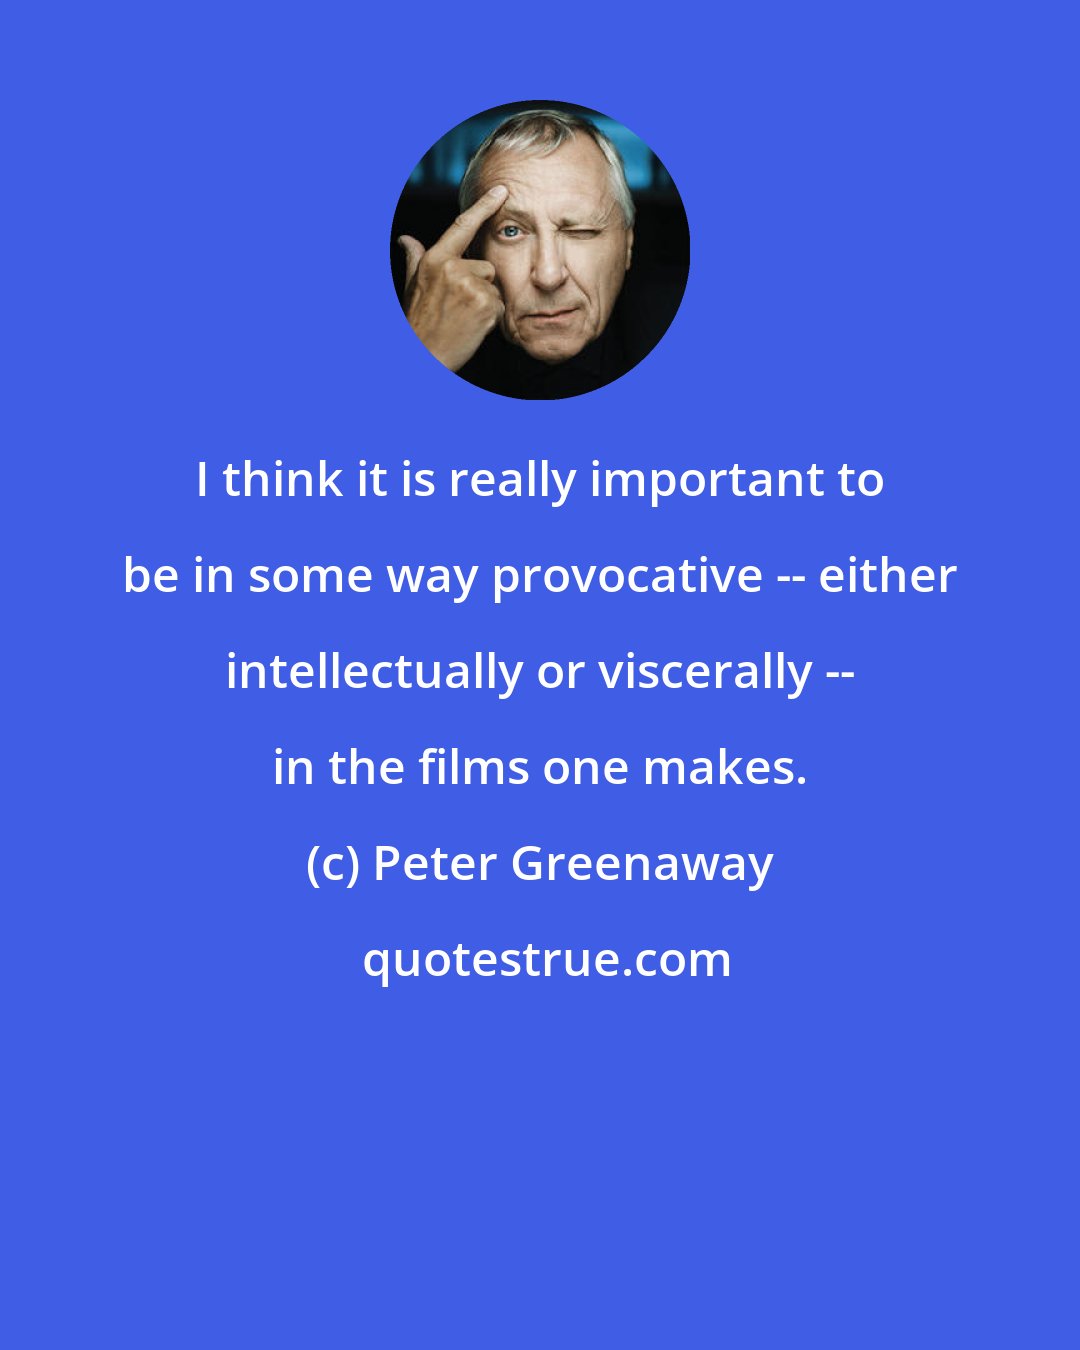 Peter Greenaway: I think it is really important to be in some way provocative -- either intellectually or viscerally -- in the films one makes.